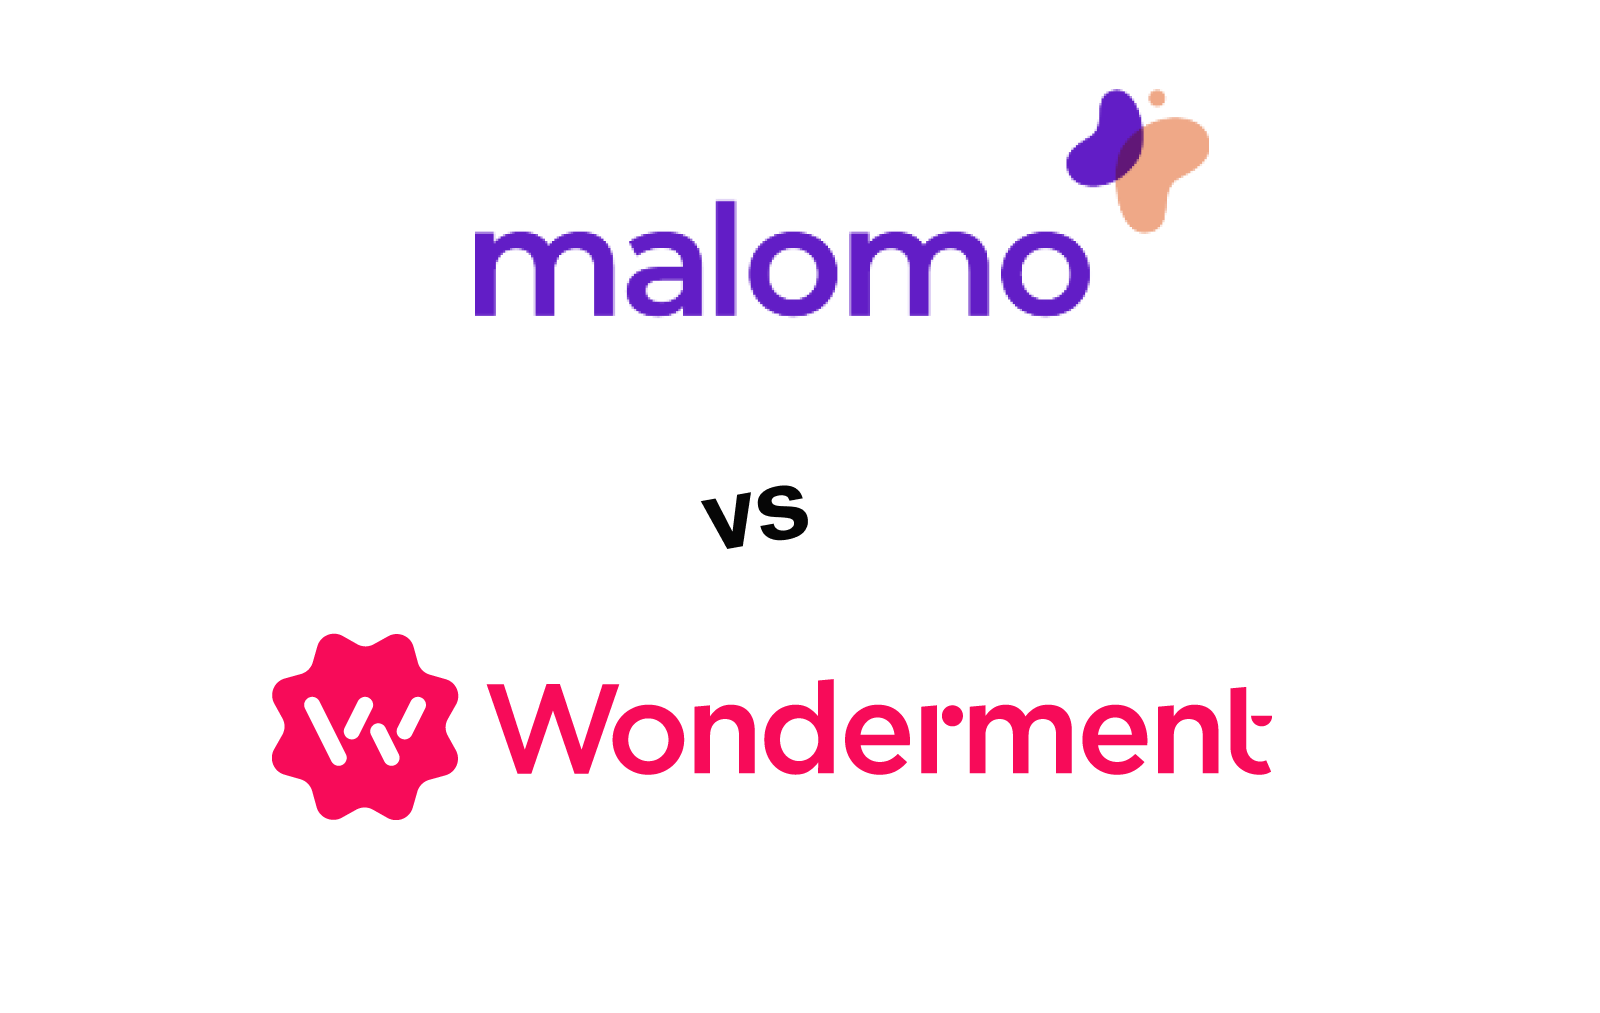 Malomo vs Wonderment: Which Should You Go For?